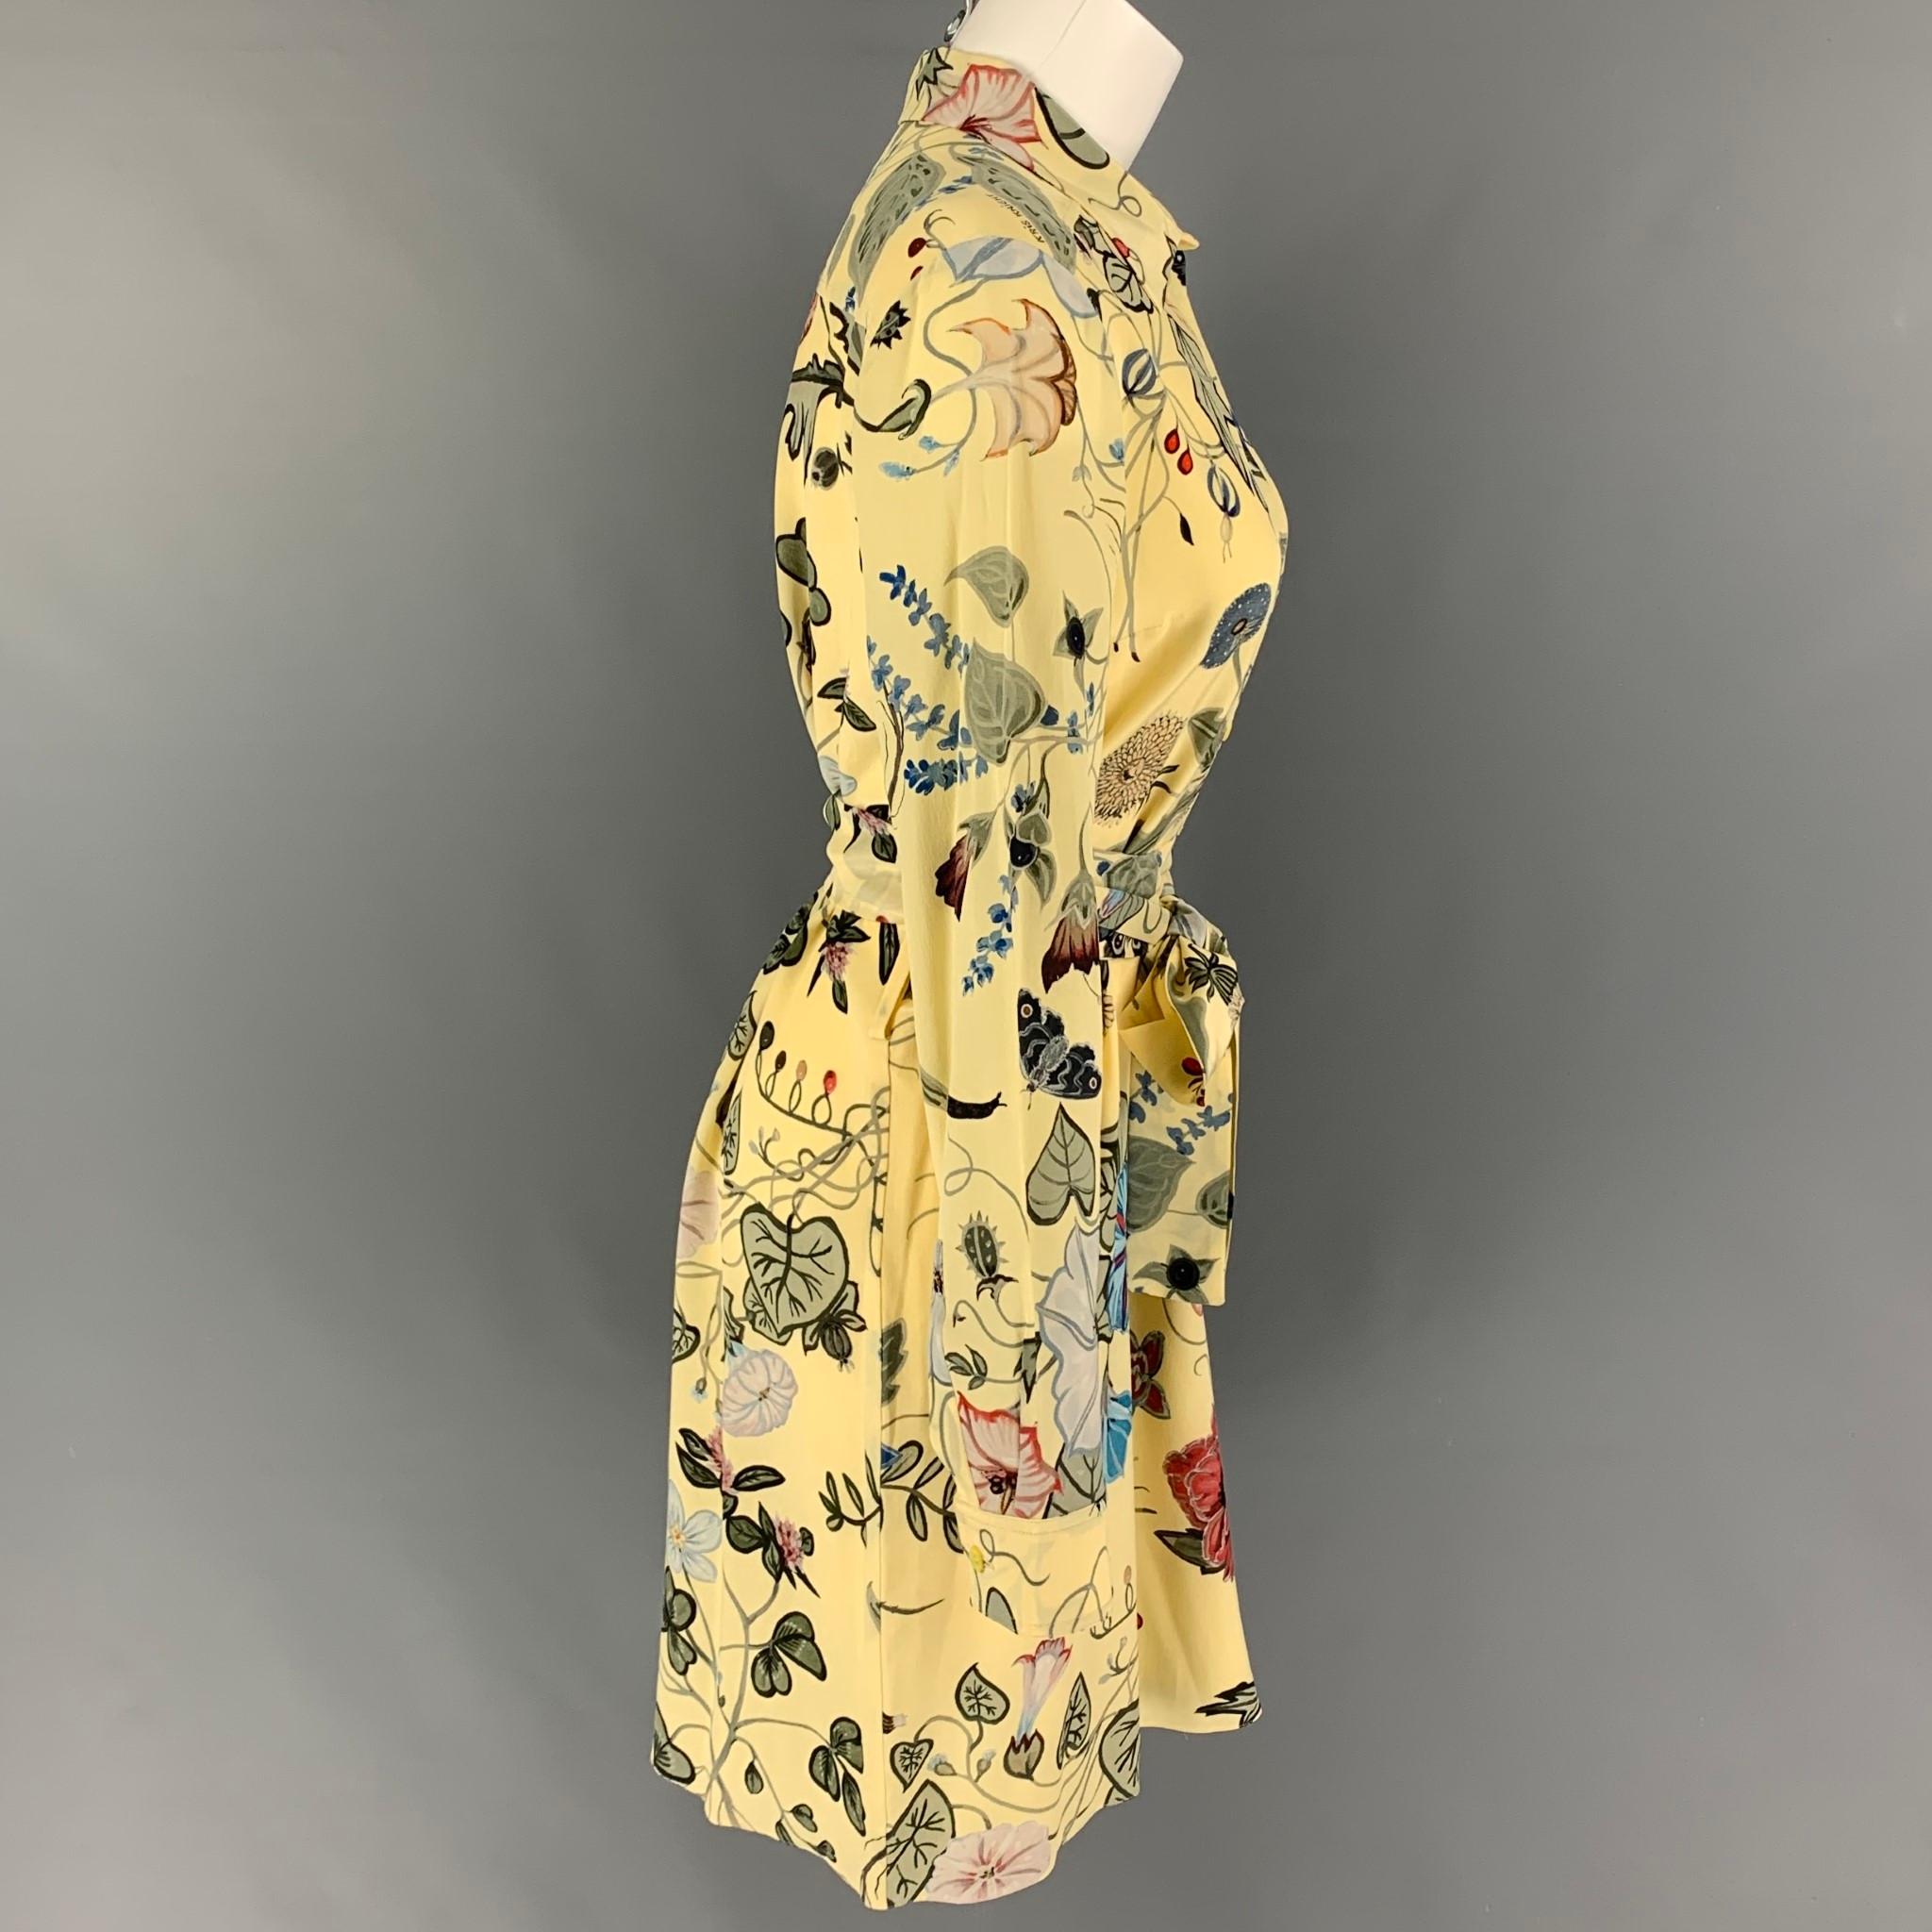 GUCCI 2015 Resort Flora by Kris Knight dress comes in a yellow & green floral silk featuring long sleeves, spread collar, belted, and a half buttoned closure. Made in Italy. 

Very Good Pre-Owned Condition.
Marked: 42

Measurements:

Shoulder: 16